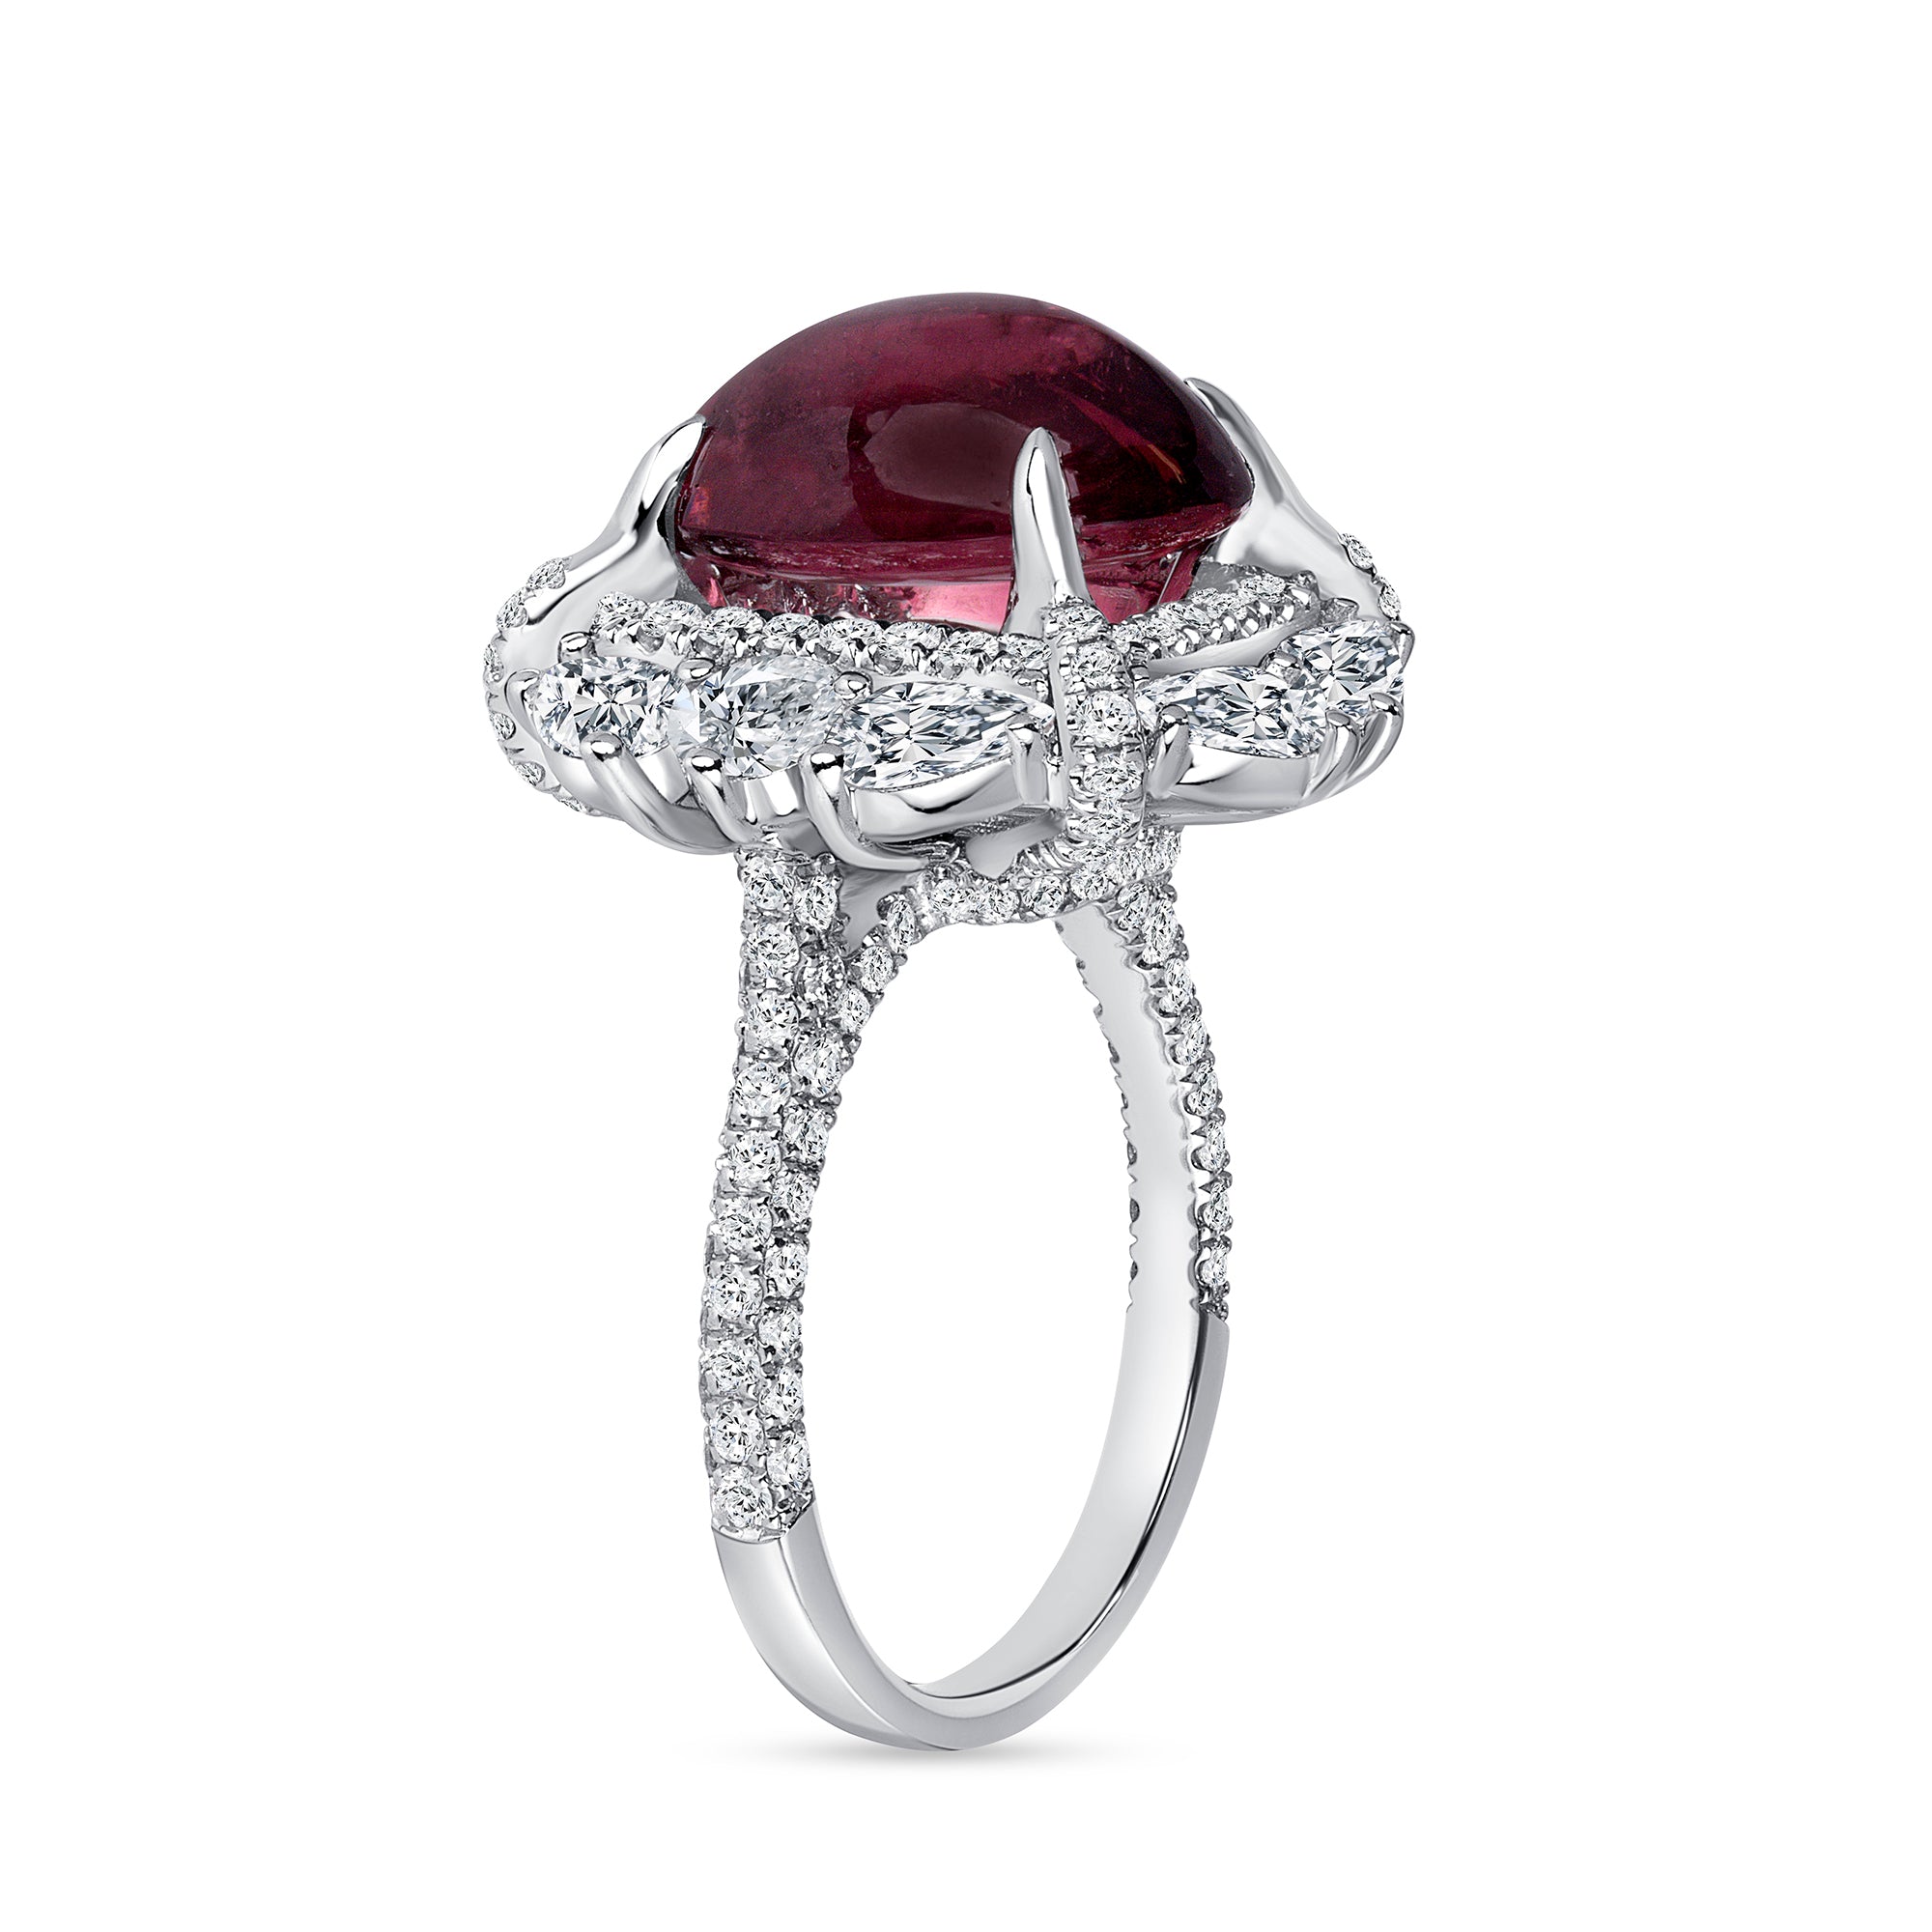 Oval Cut Ruby Cabochon Ring With A Diamond Halo In Platinum Ruthenium